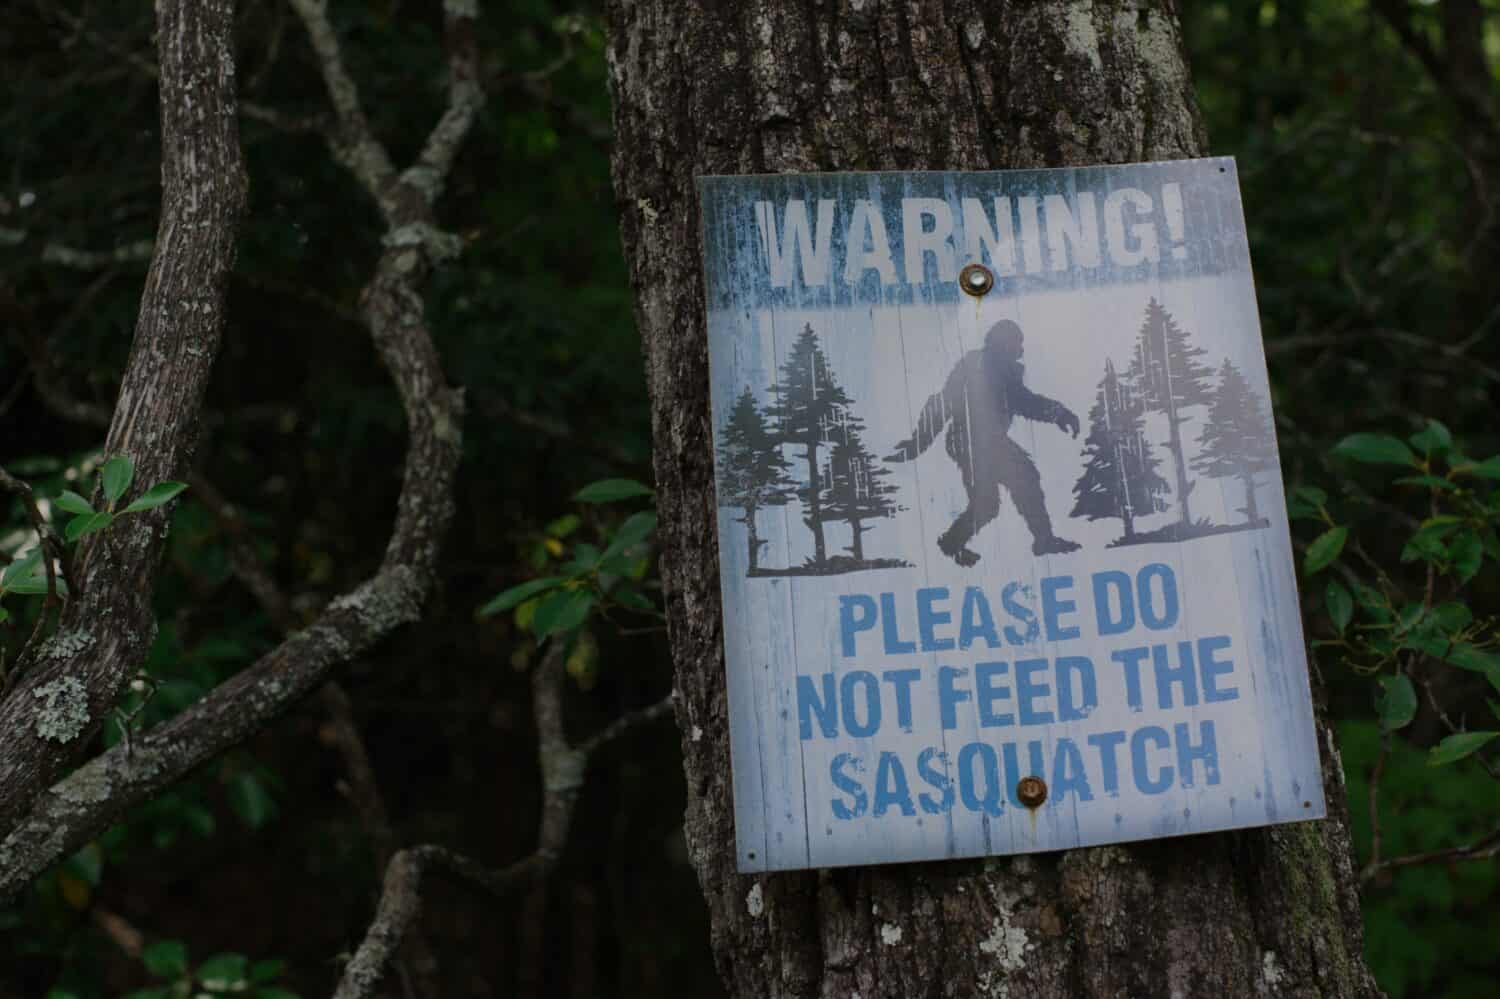 Sasquatch warning sign attached to a tree in the woods. Blue and black sign. Please do not feed.